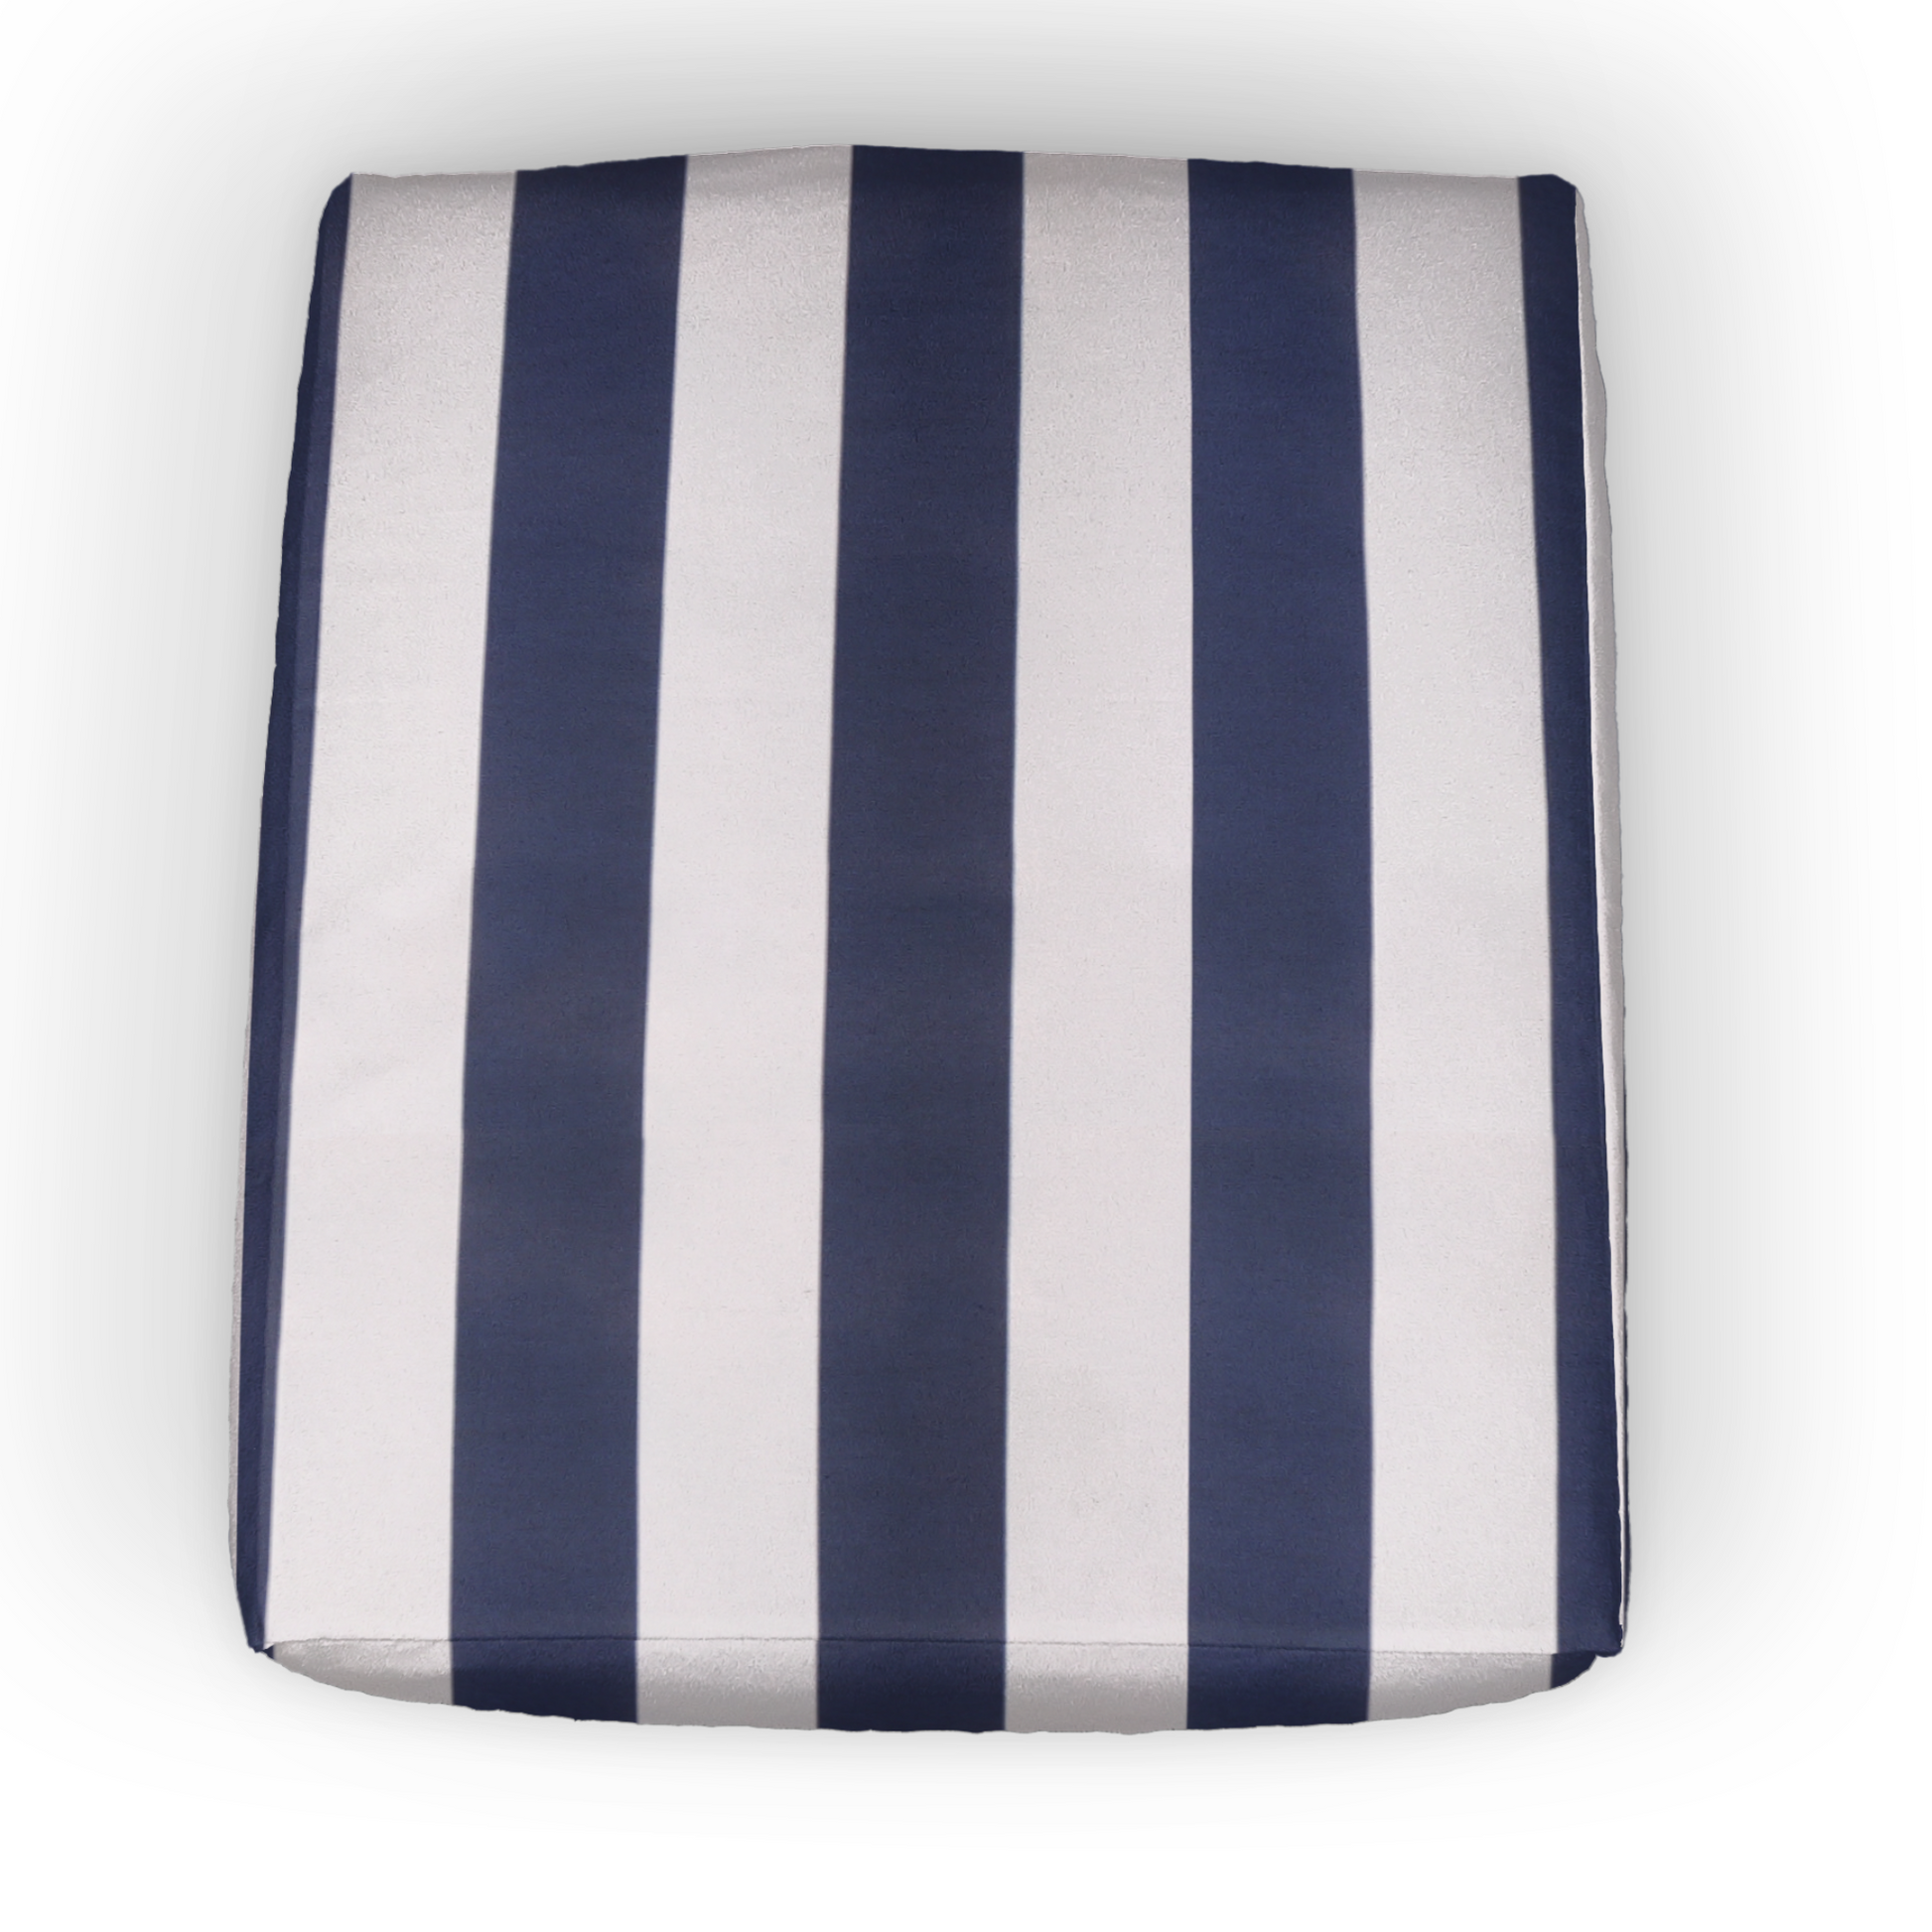 Custom Elastic Fitted Cushion Covers, Outdoor Furniture Covers, Patio Furniture Covers, Patio Chair Covers, Outdoor Chair Covers - Cabana Stripe